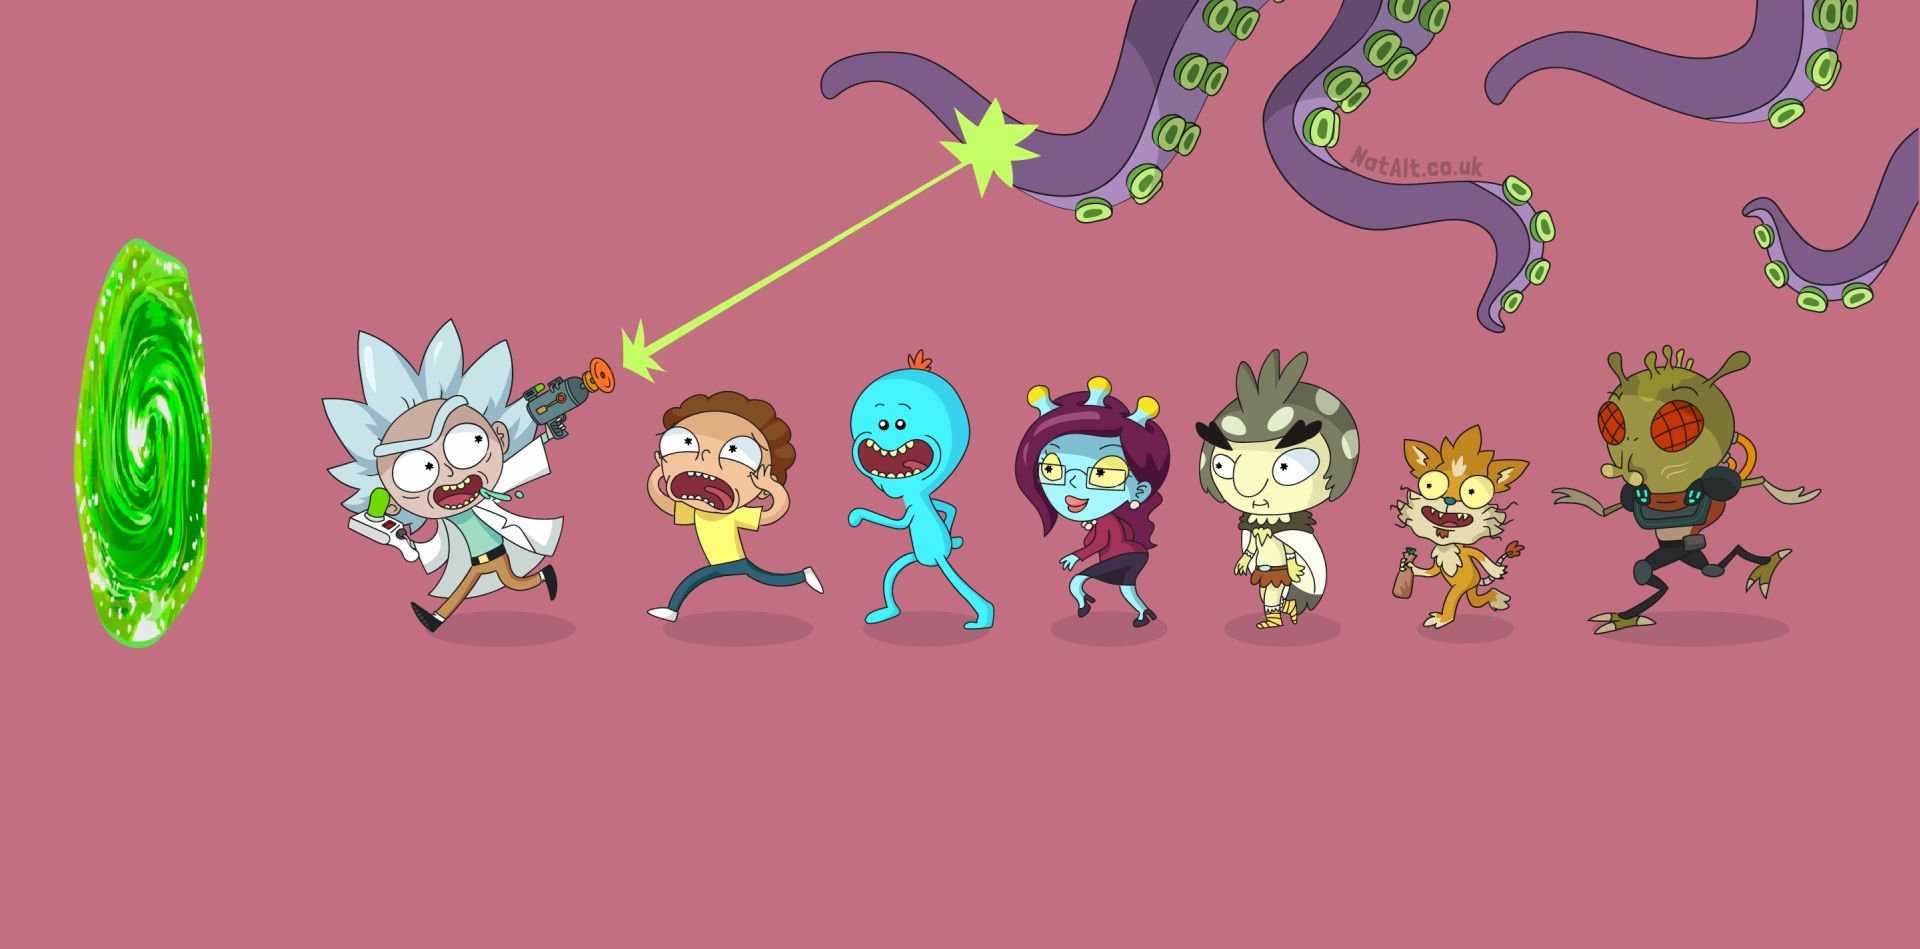 Rick and Morty laptop wallpaper